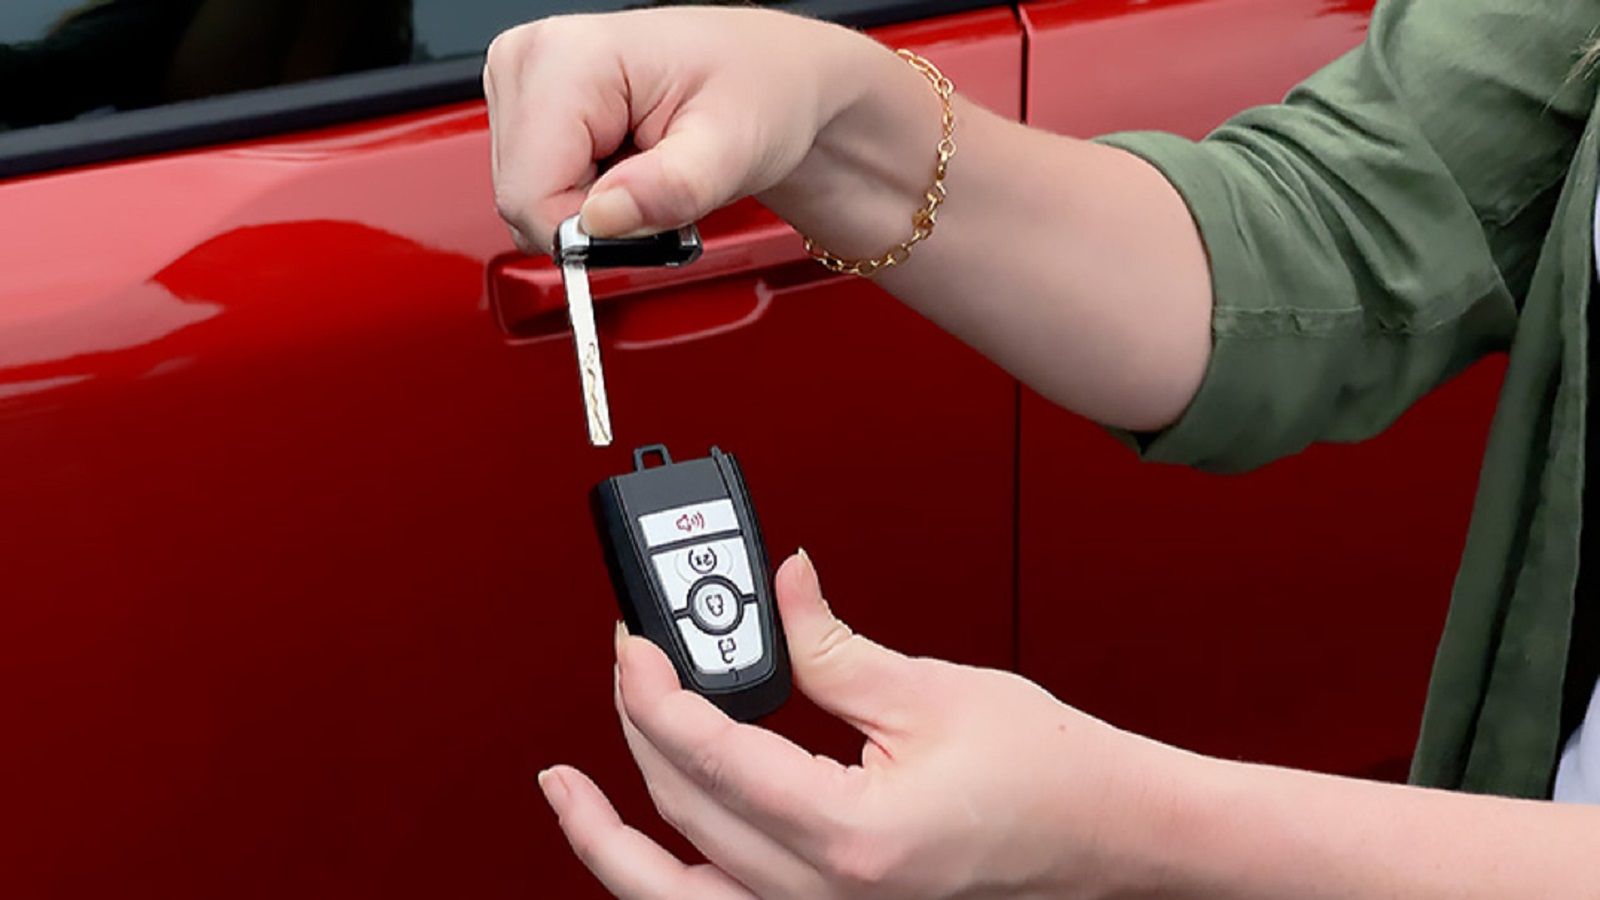 How To Remote Start Car With Key Fob